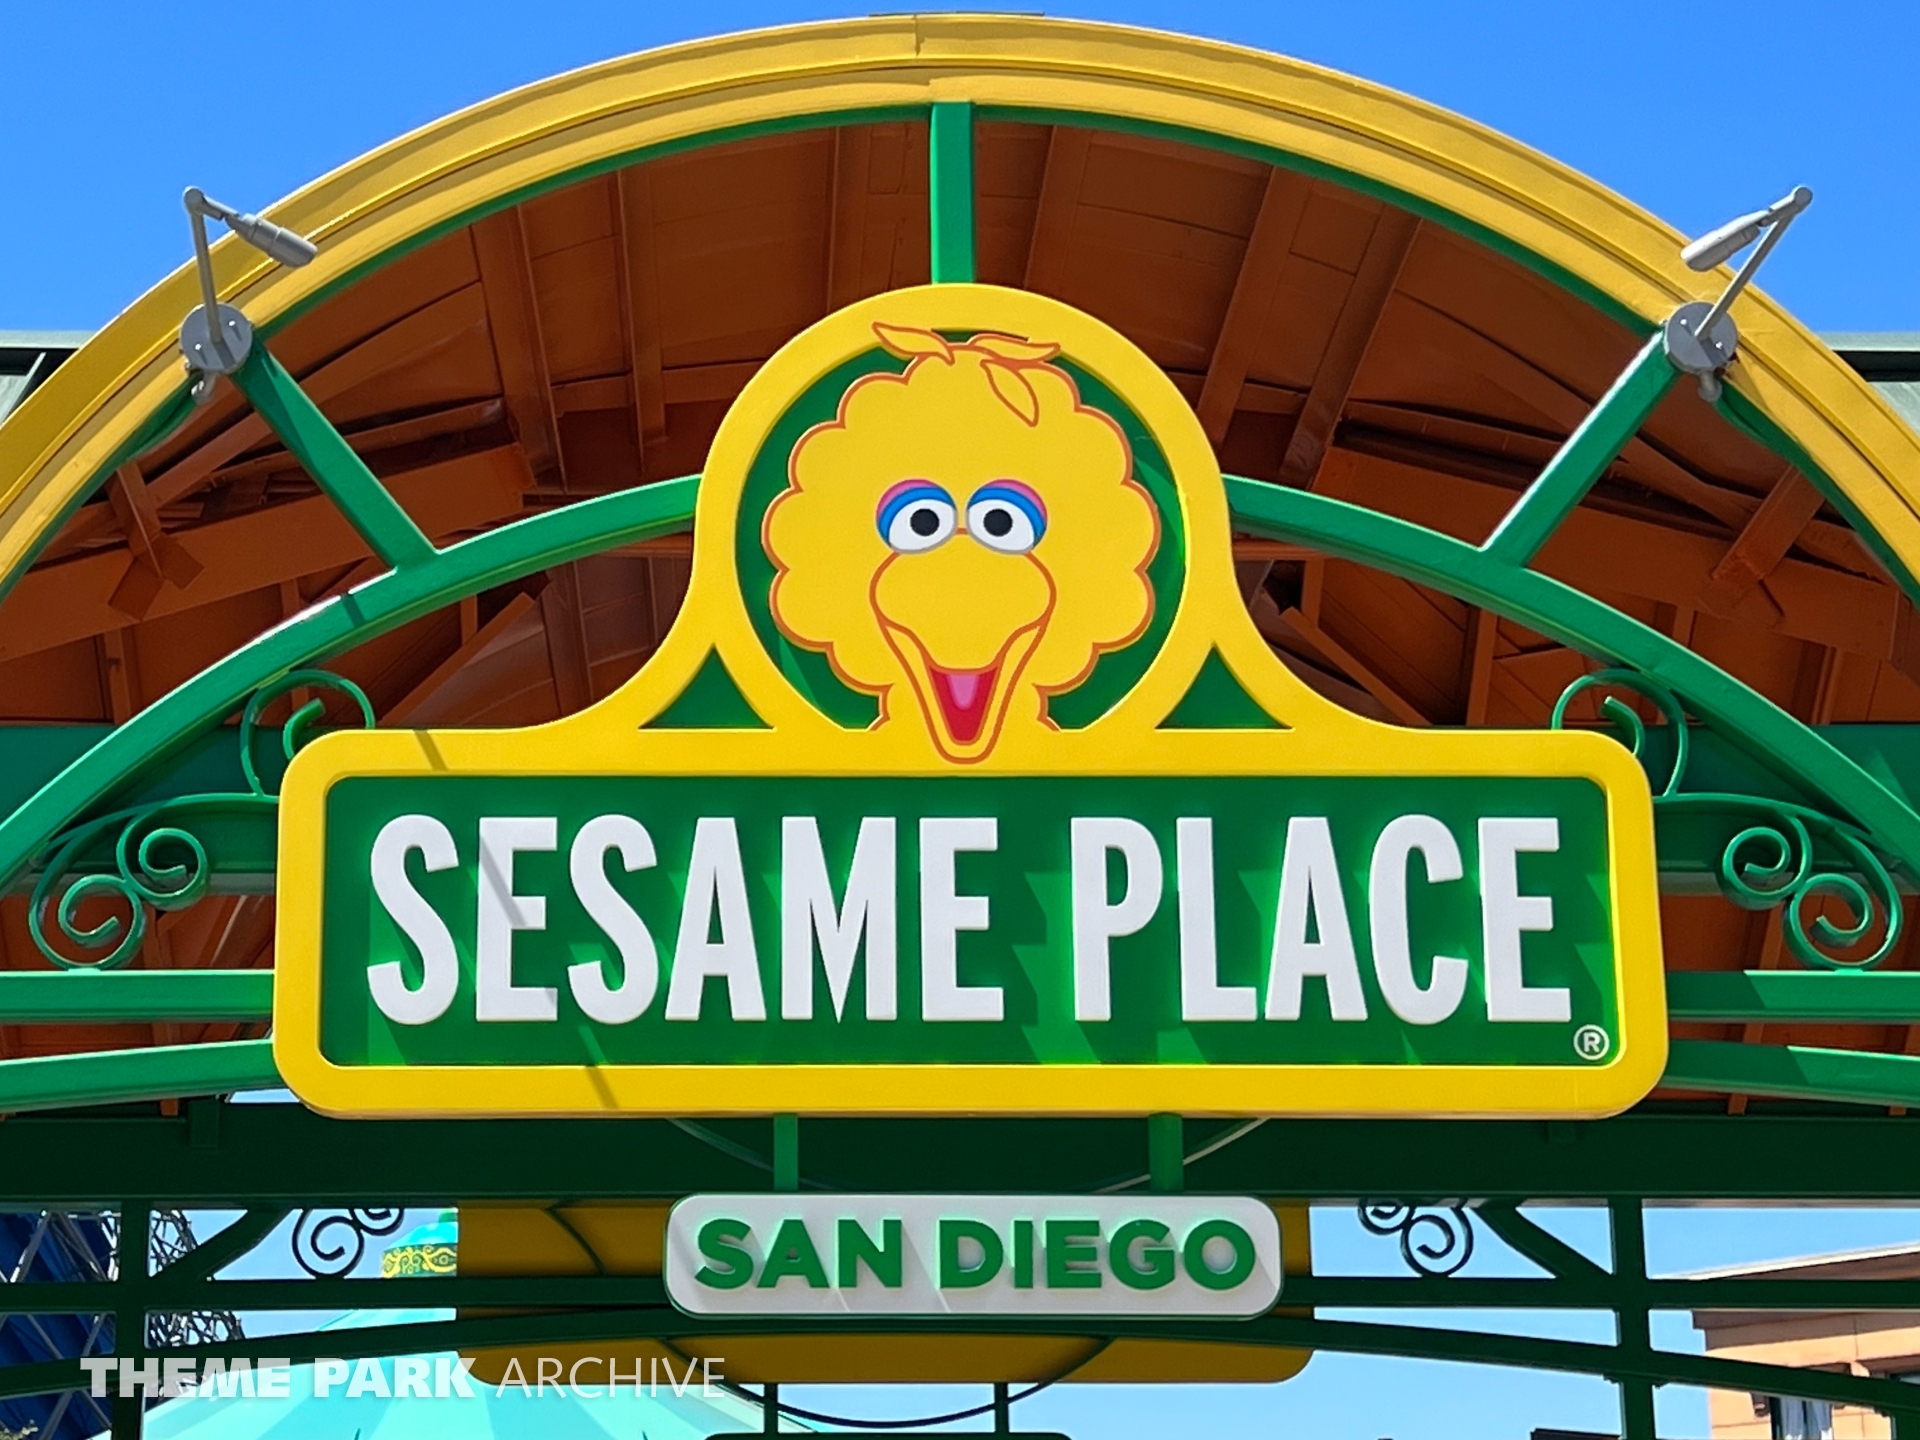 We visit the newest Sesame Place